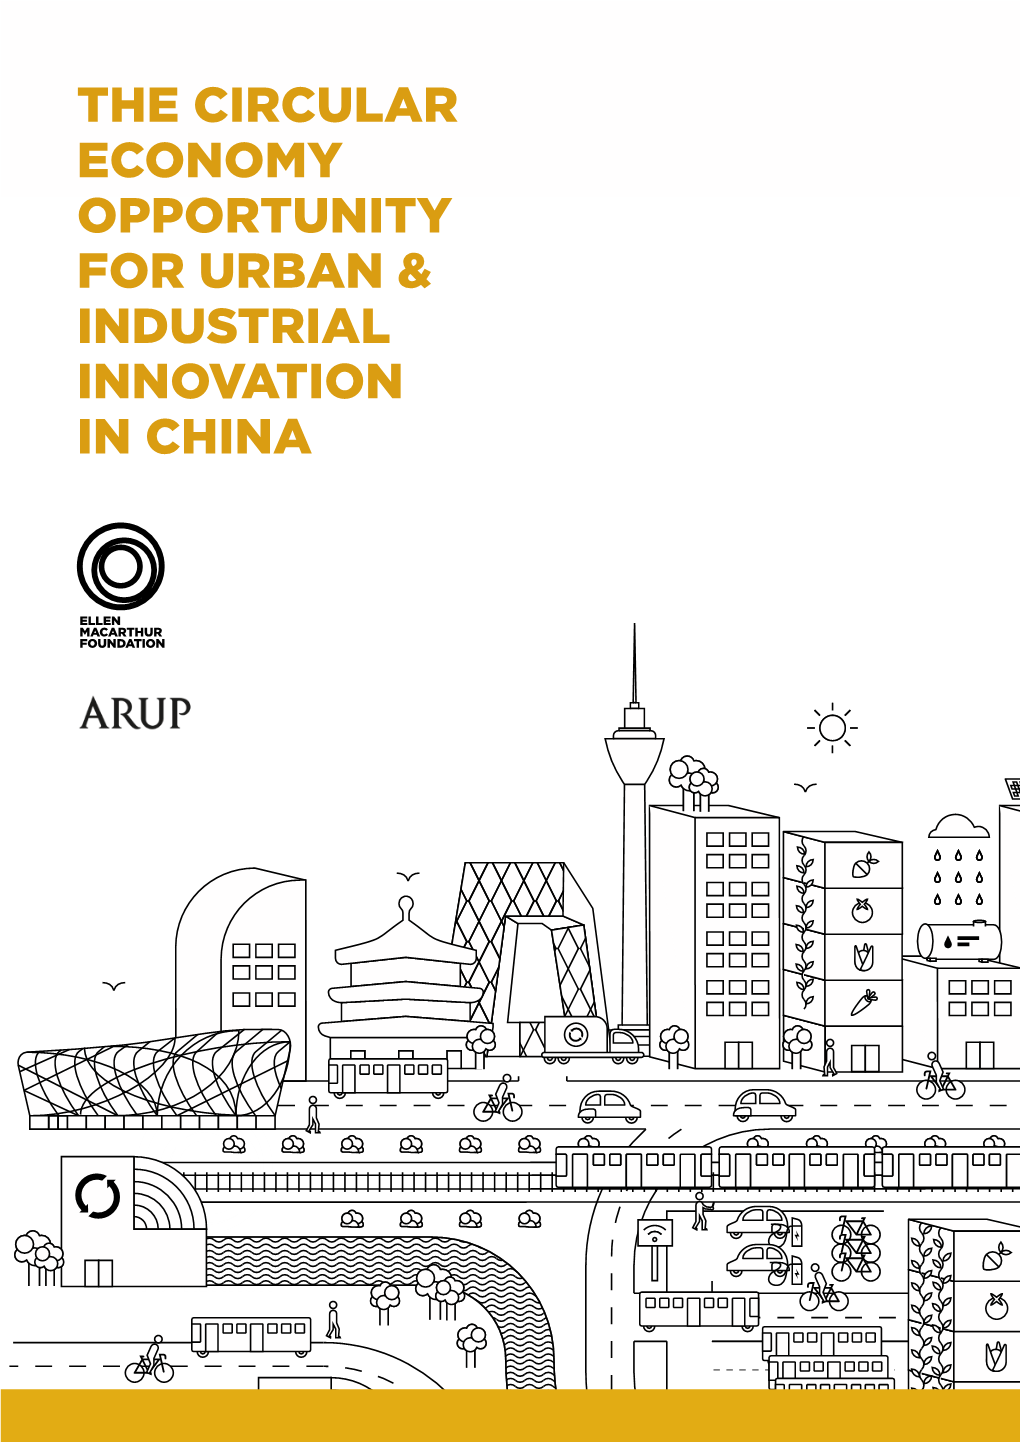 The Circular Economy Opportunity for Urban & Industrial Innovation